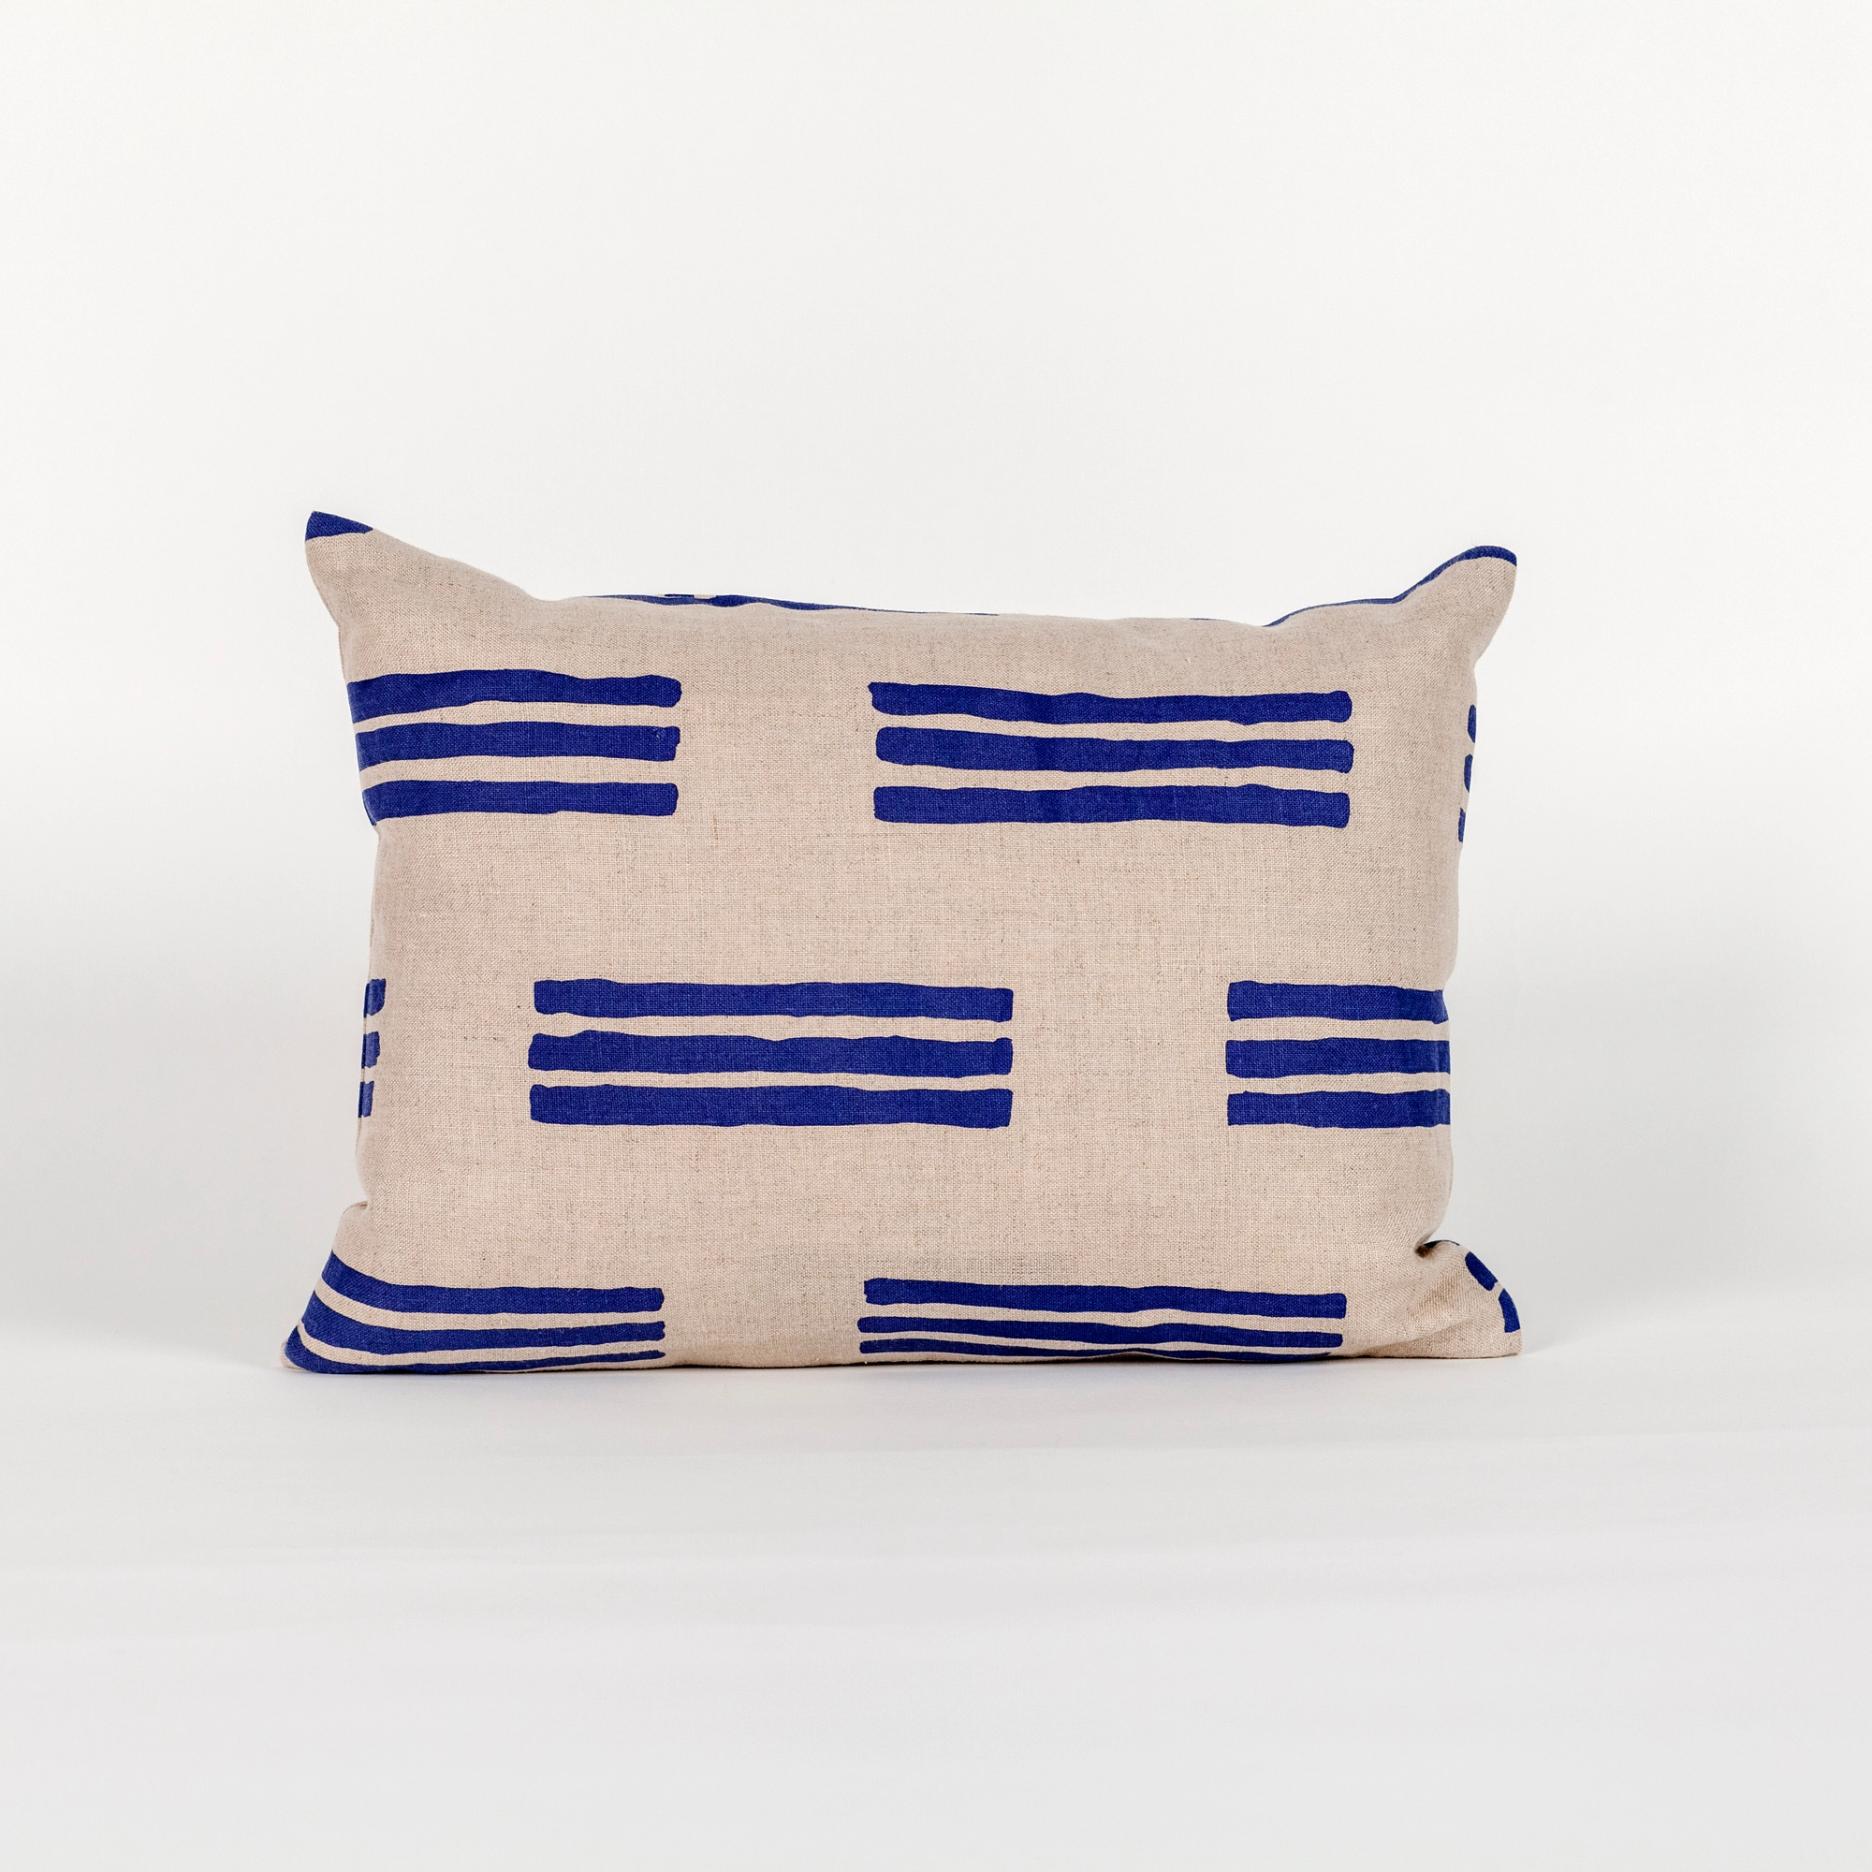 A wide rectangular pillow made of light brown fabric with a minimal pattern of blue horizontal stripes in groups of 3